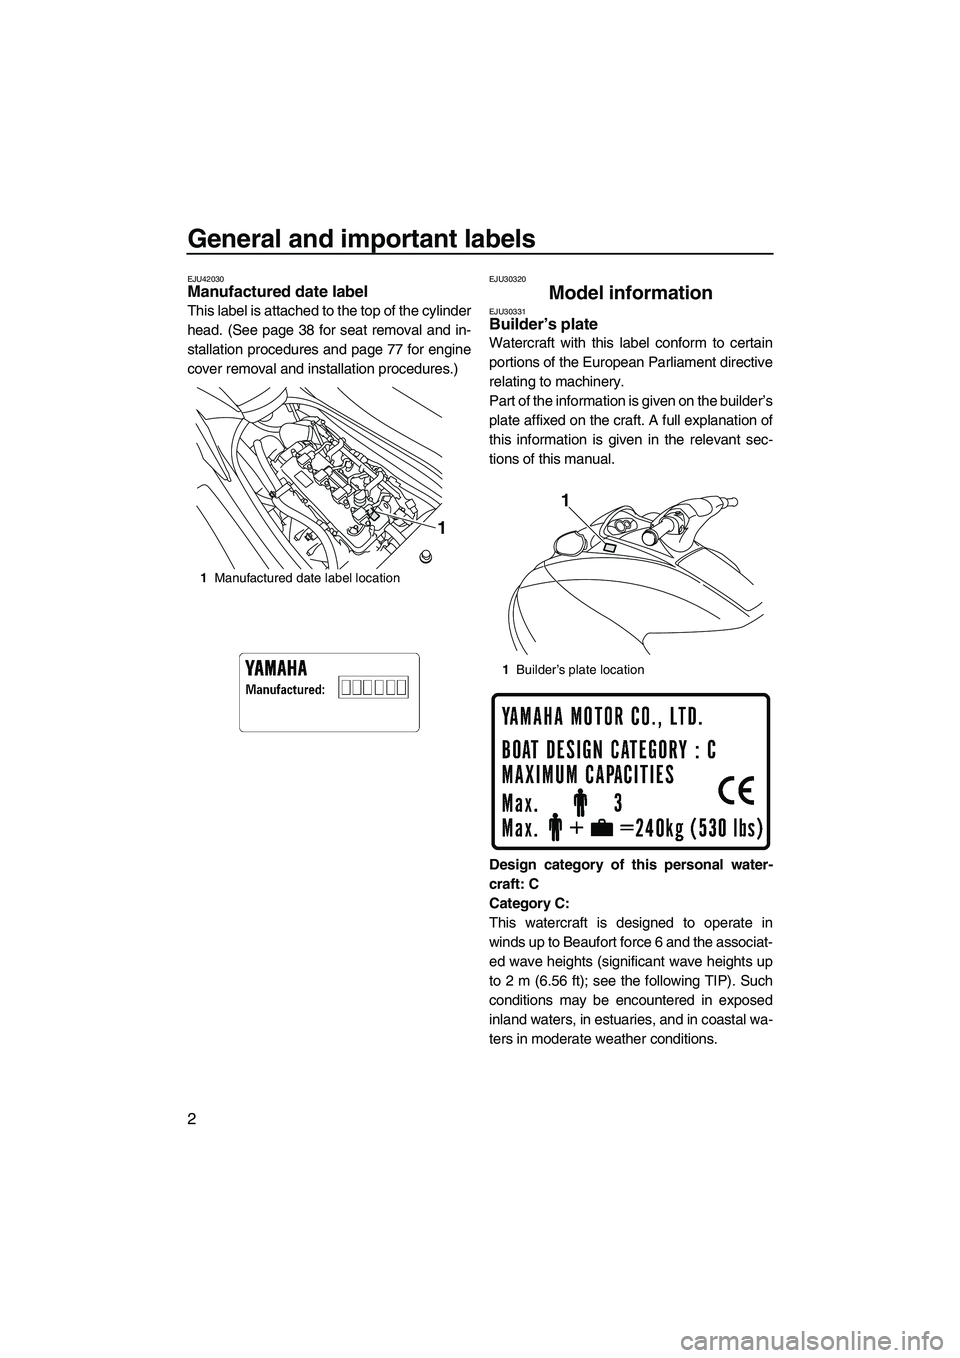 YAMAHA VXS 2012  Owners Manual General and important labels
2
EJU42030Manufactured date label 
This label is attached to the top of the cylinder
head. (See page 38 for seat removal and in-
stallation procedures and page 77 for engi